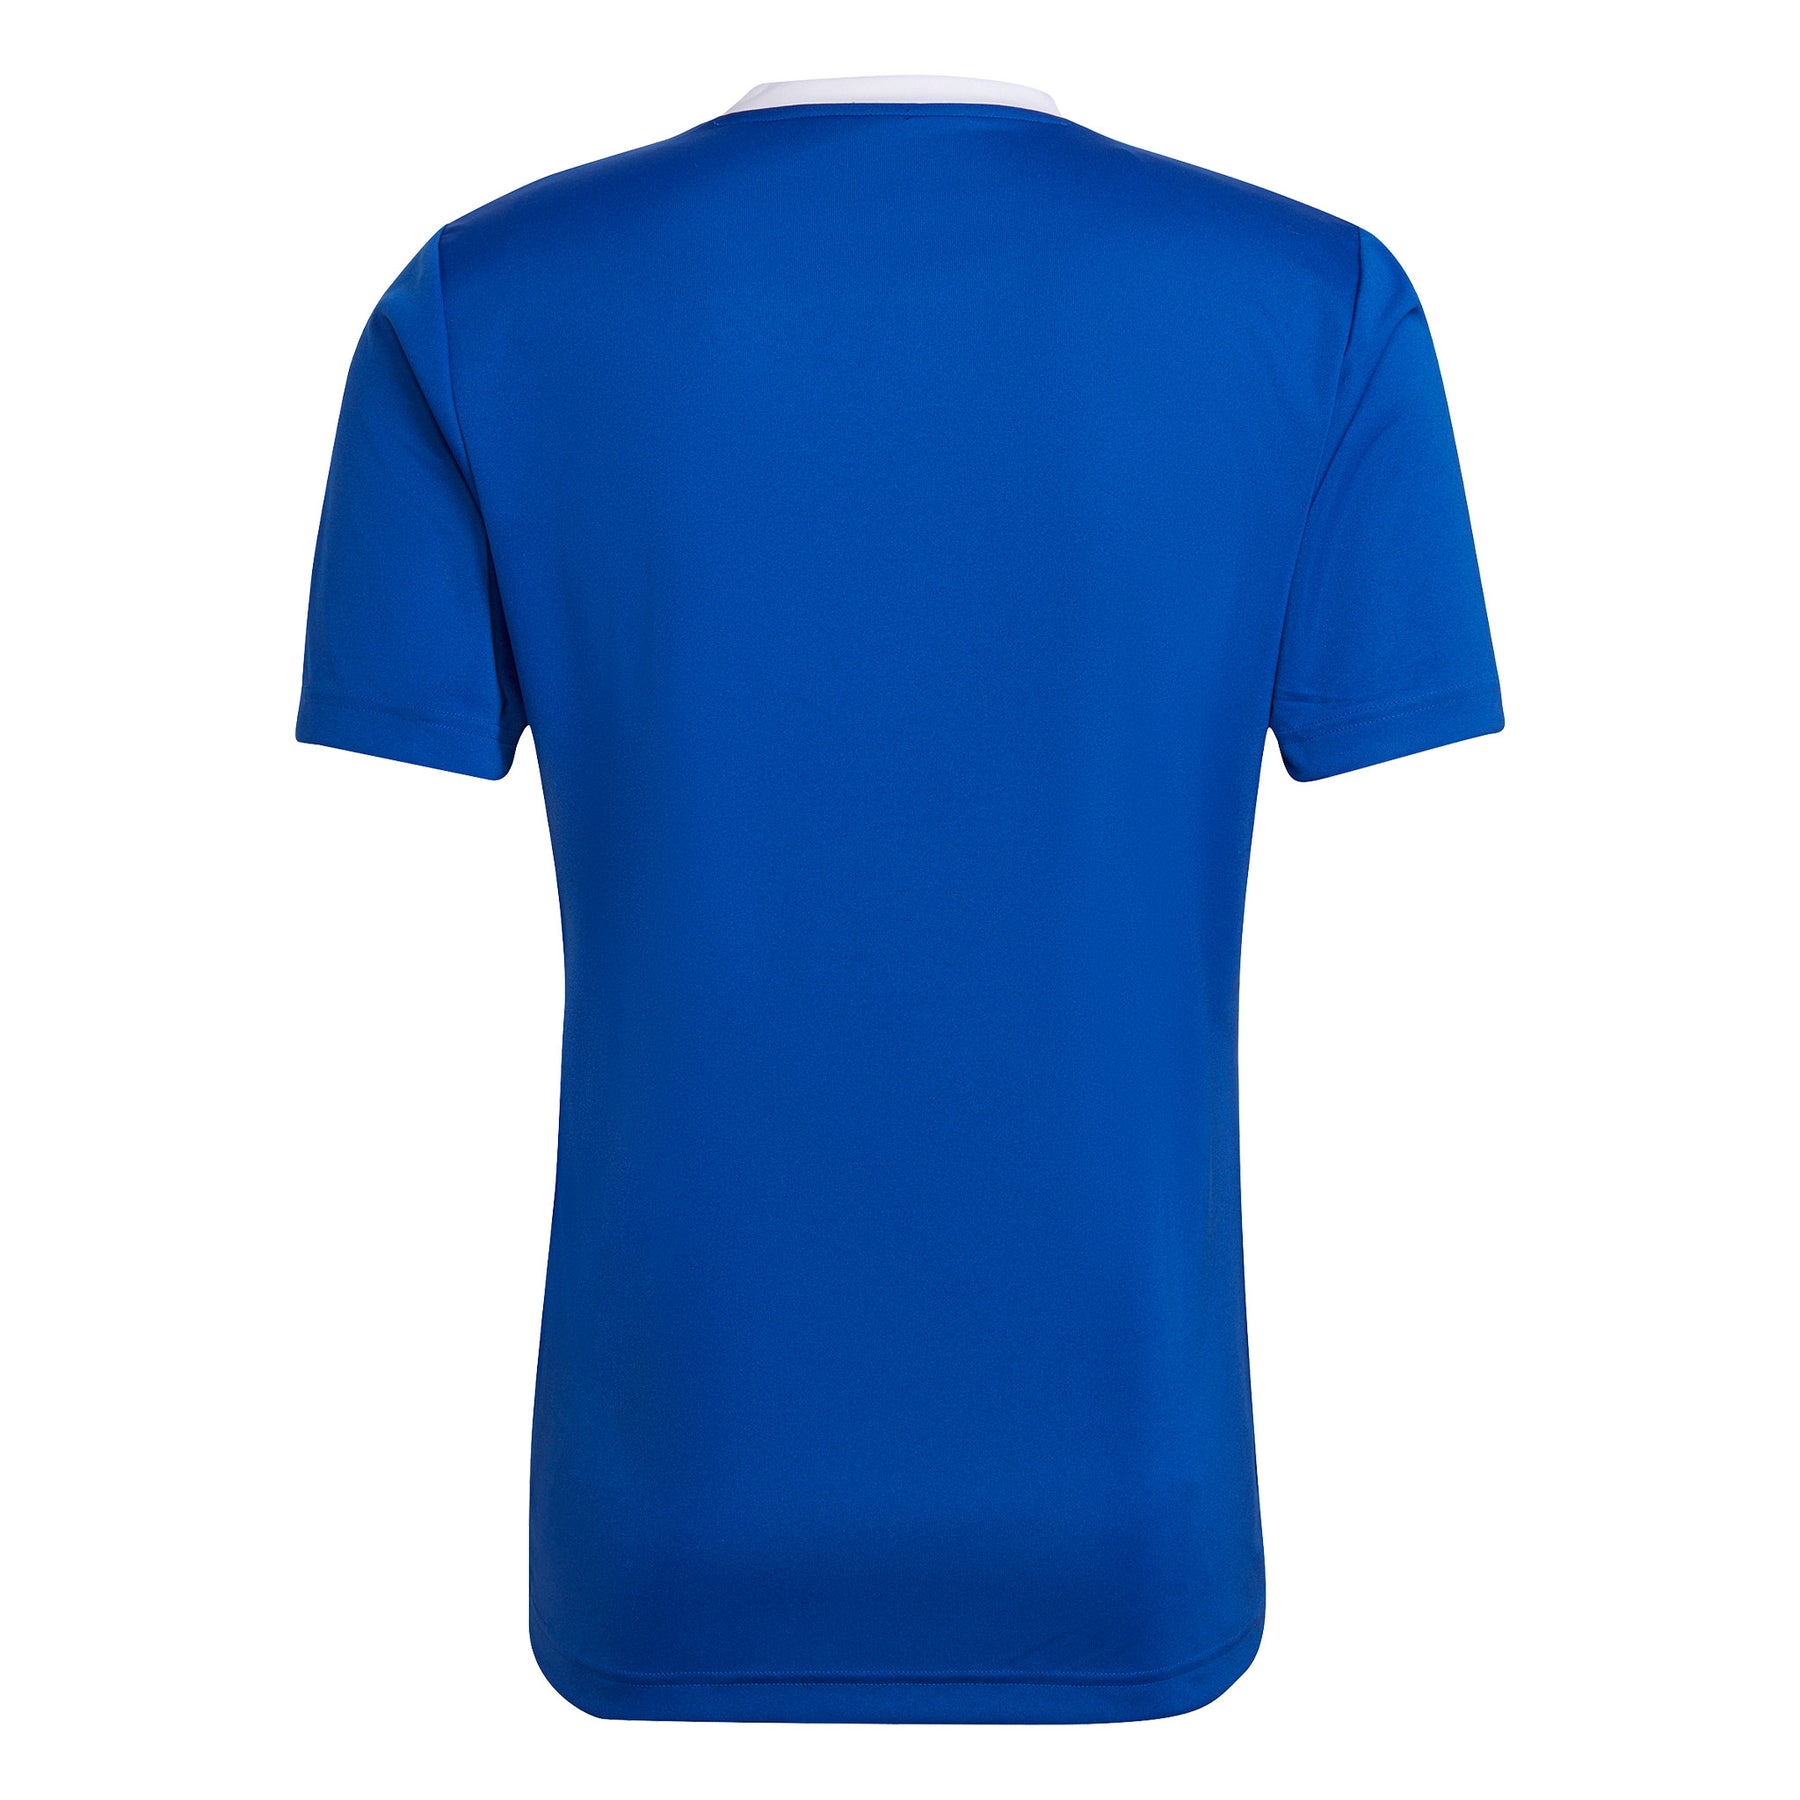 Hampstead and Westminster HC GK Jersey: Royal